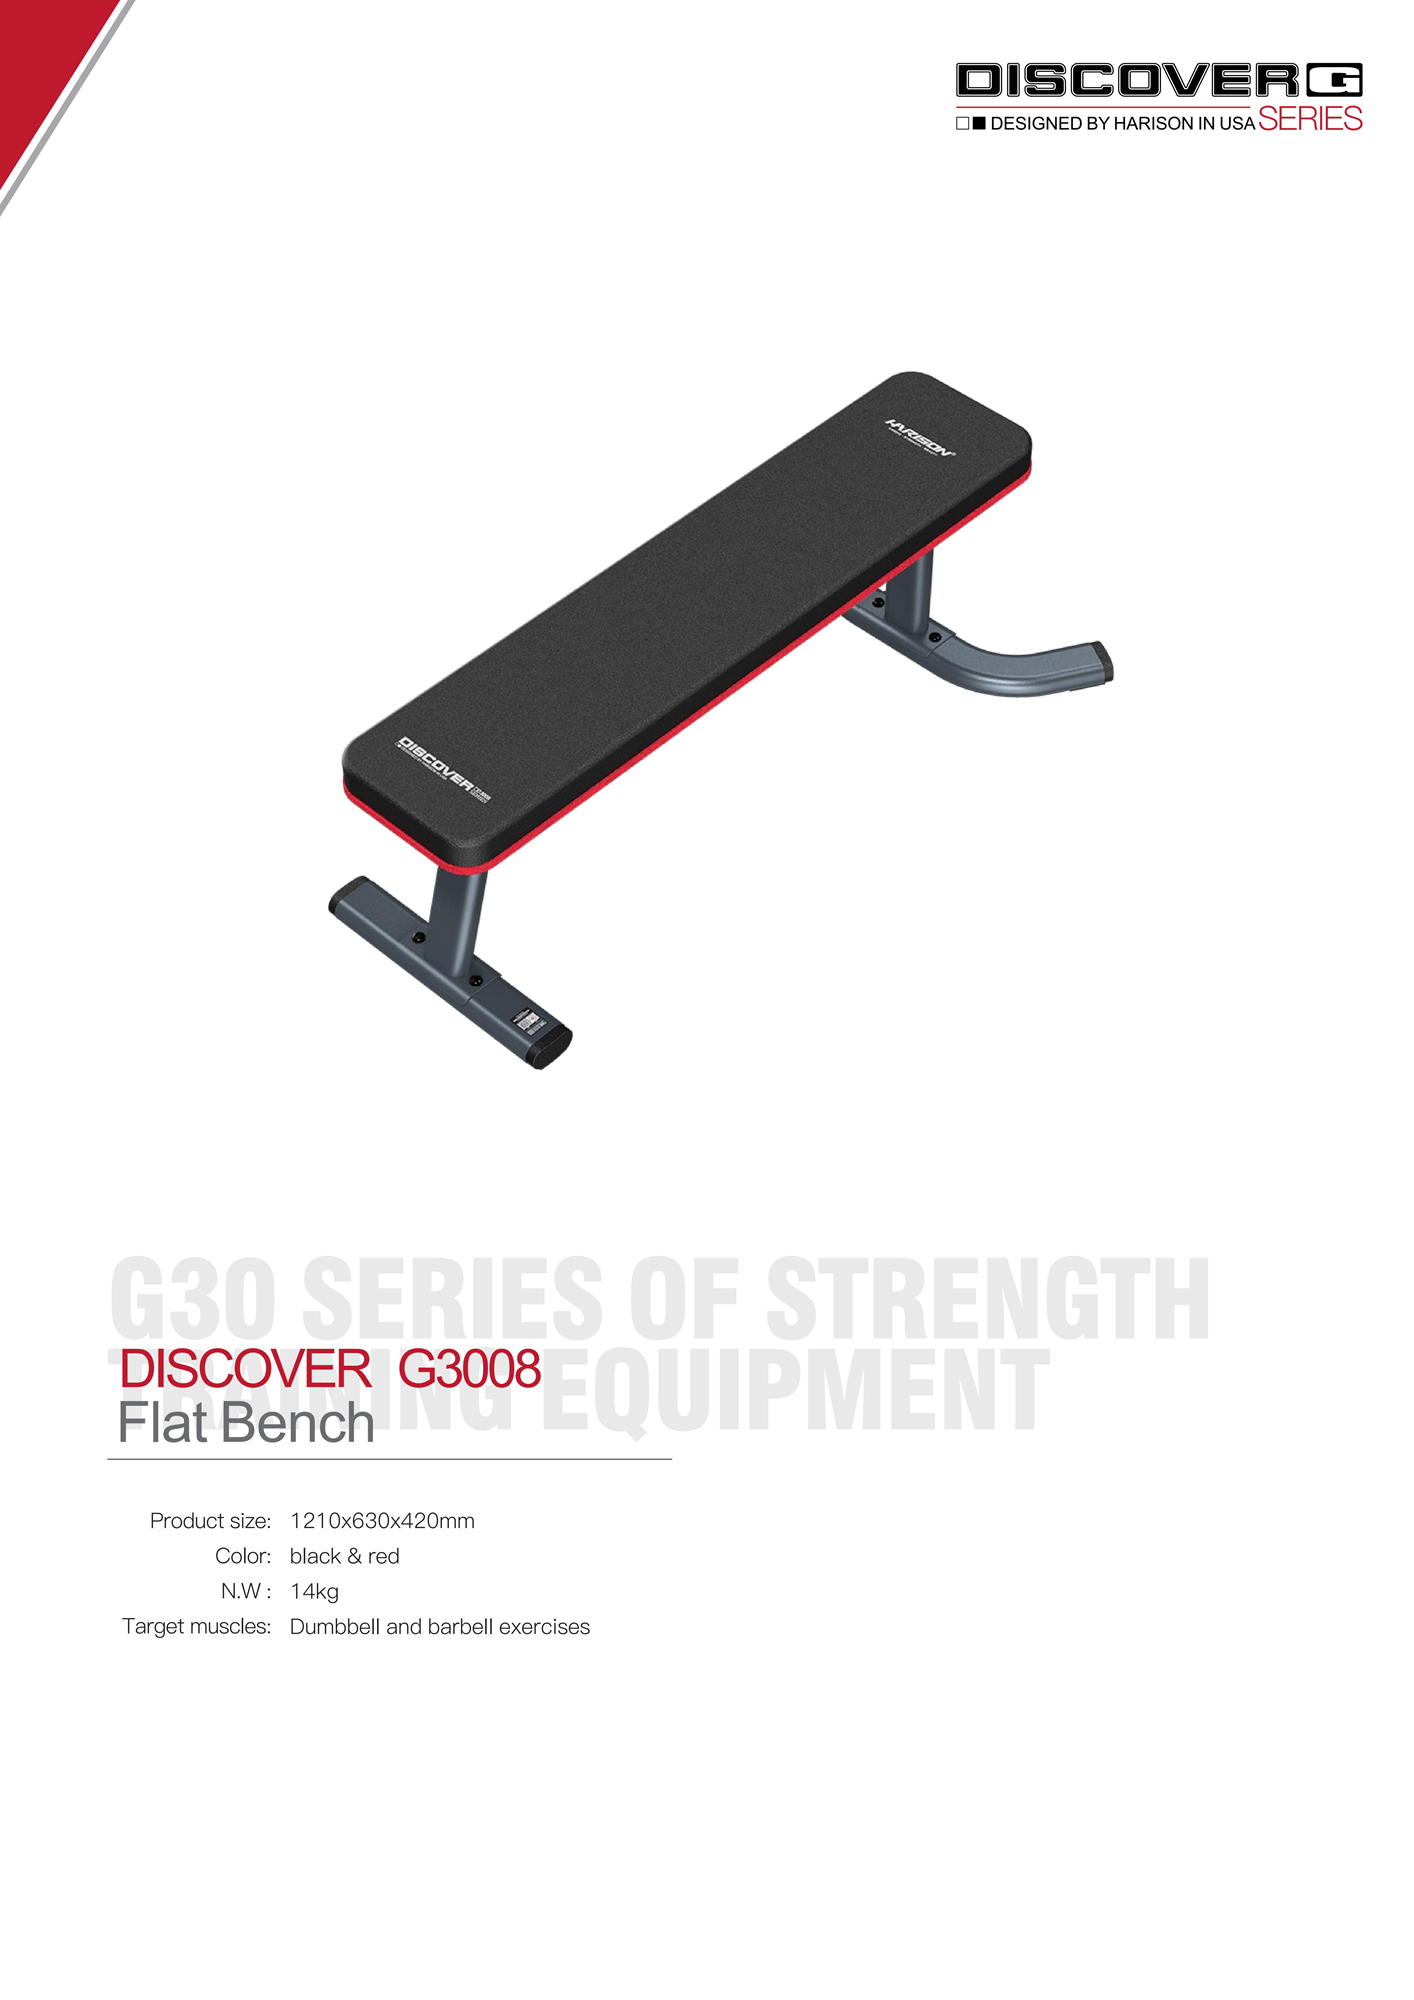 DISCOVER G3008 Flat Bench